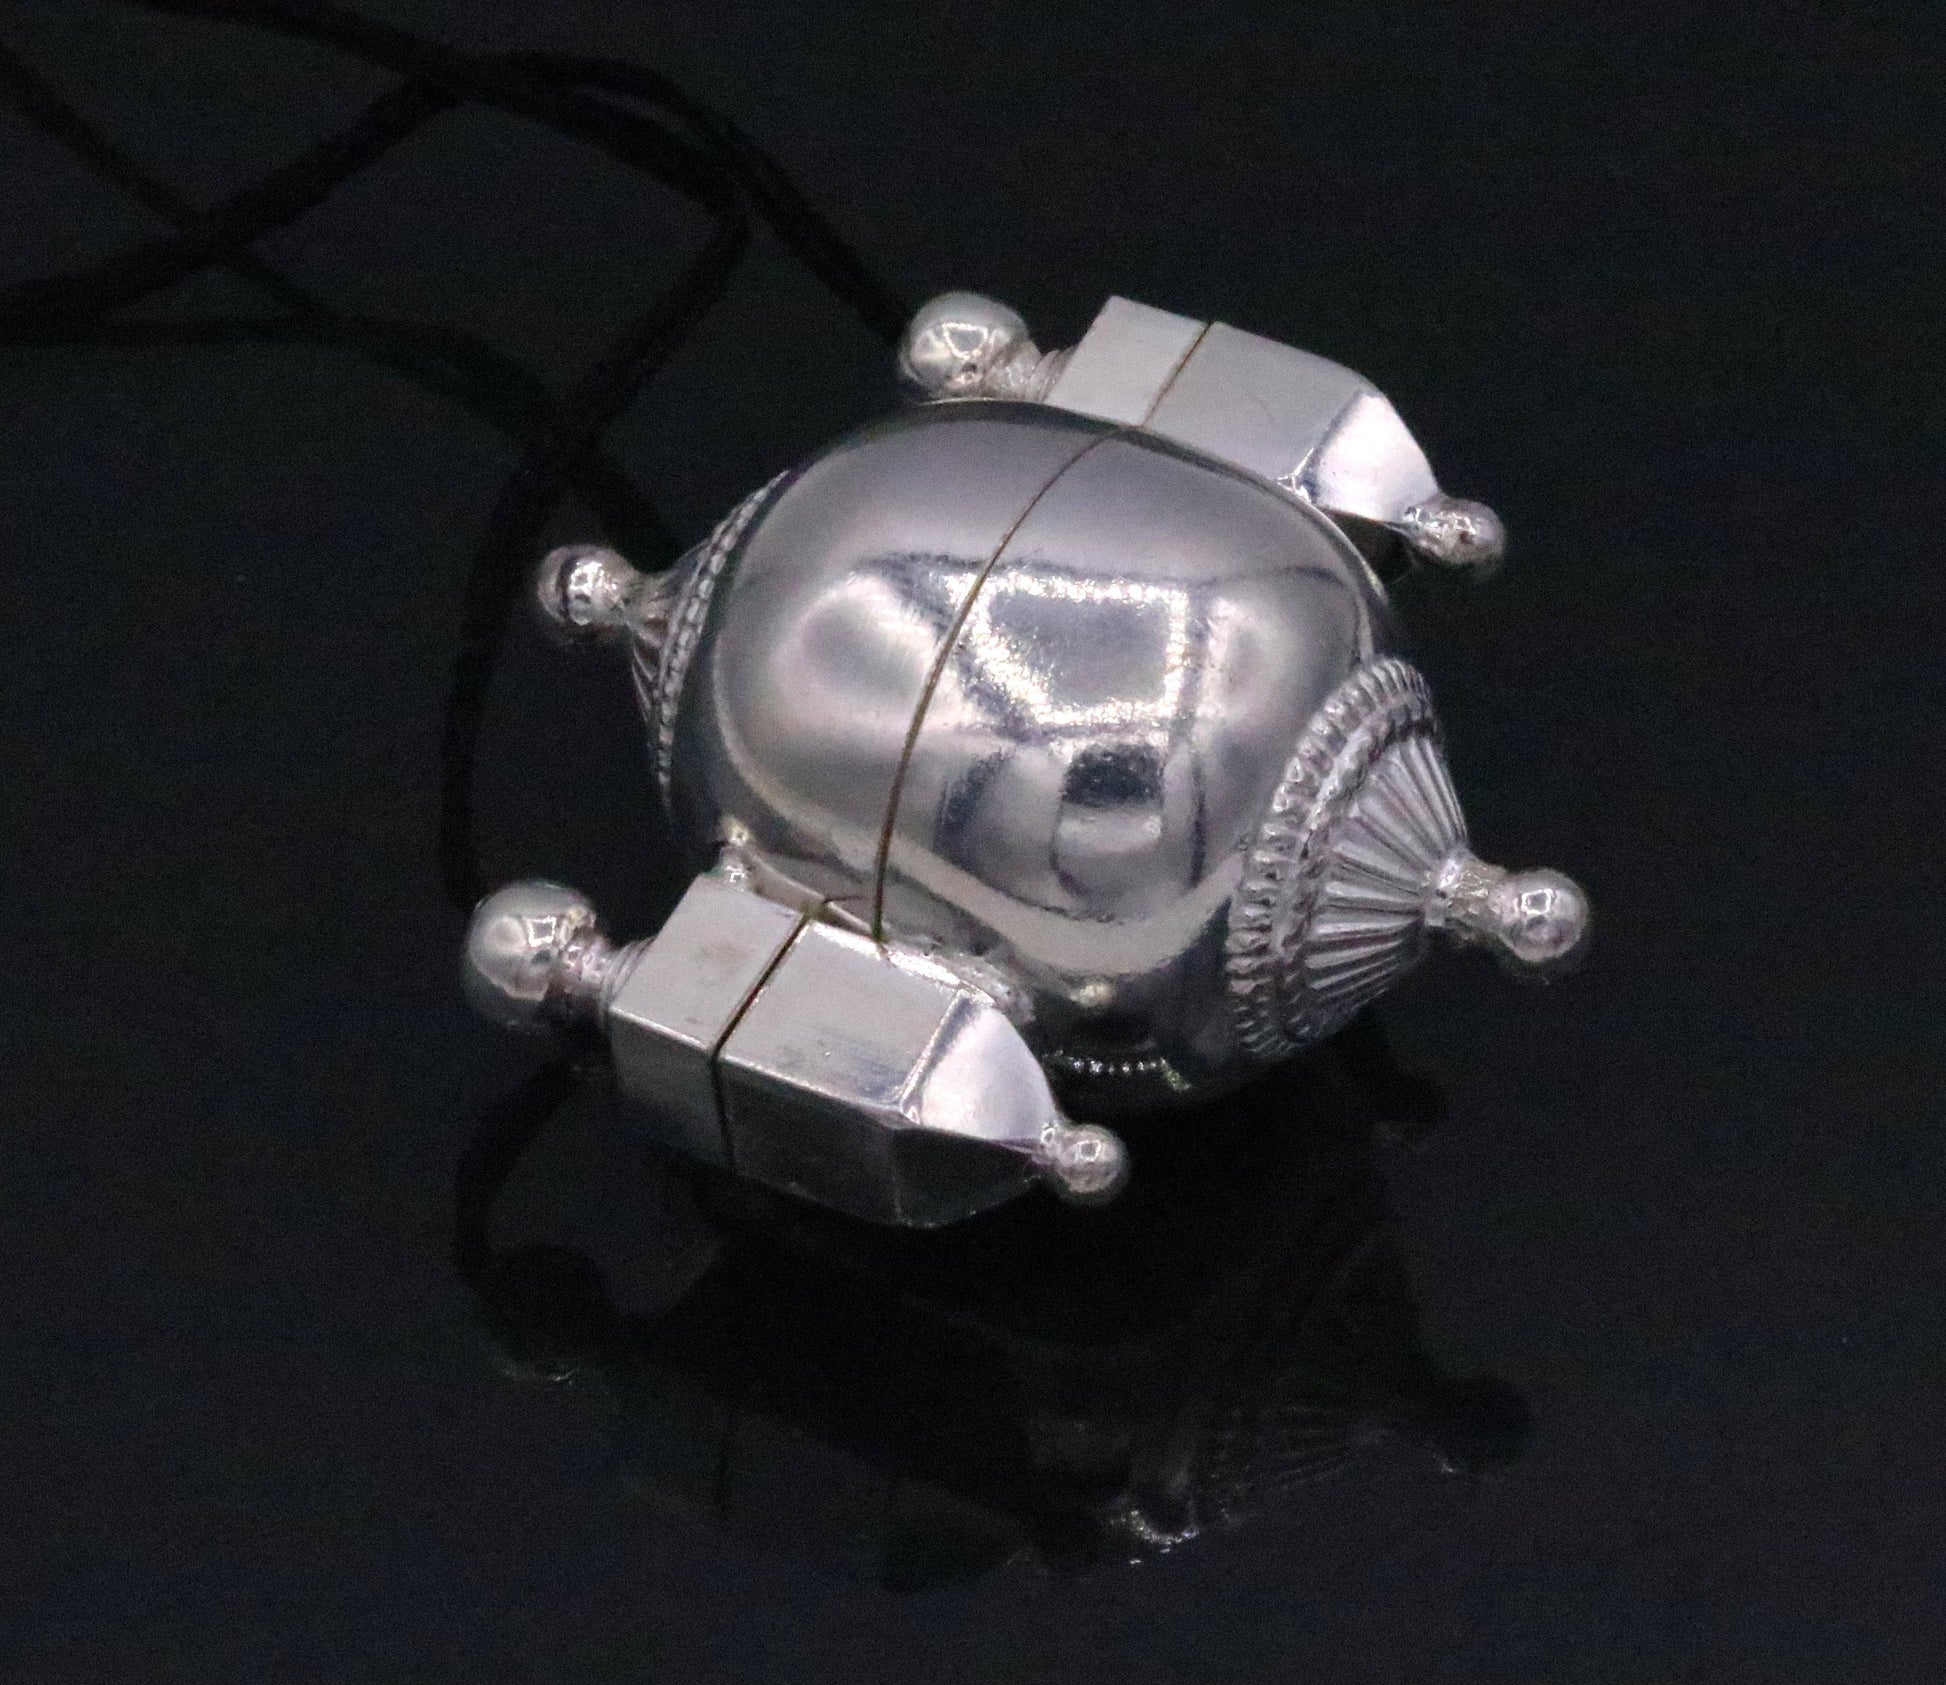 Indian lord shiva lingam box container box sterling silver pendant jewelry from rajasthan india nsp114 - TRIBAL ORNAMENTS